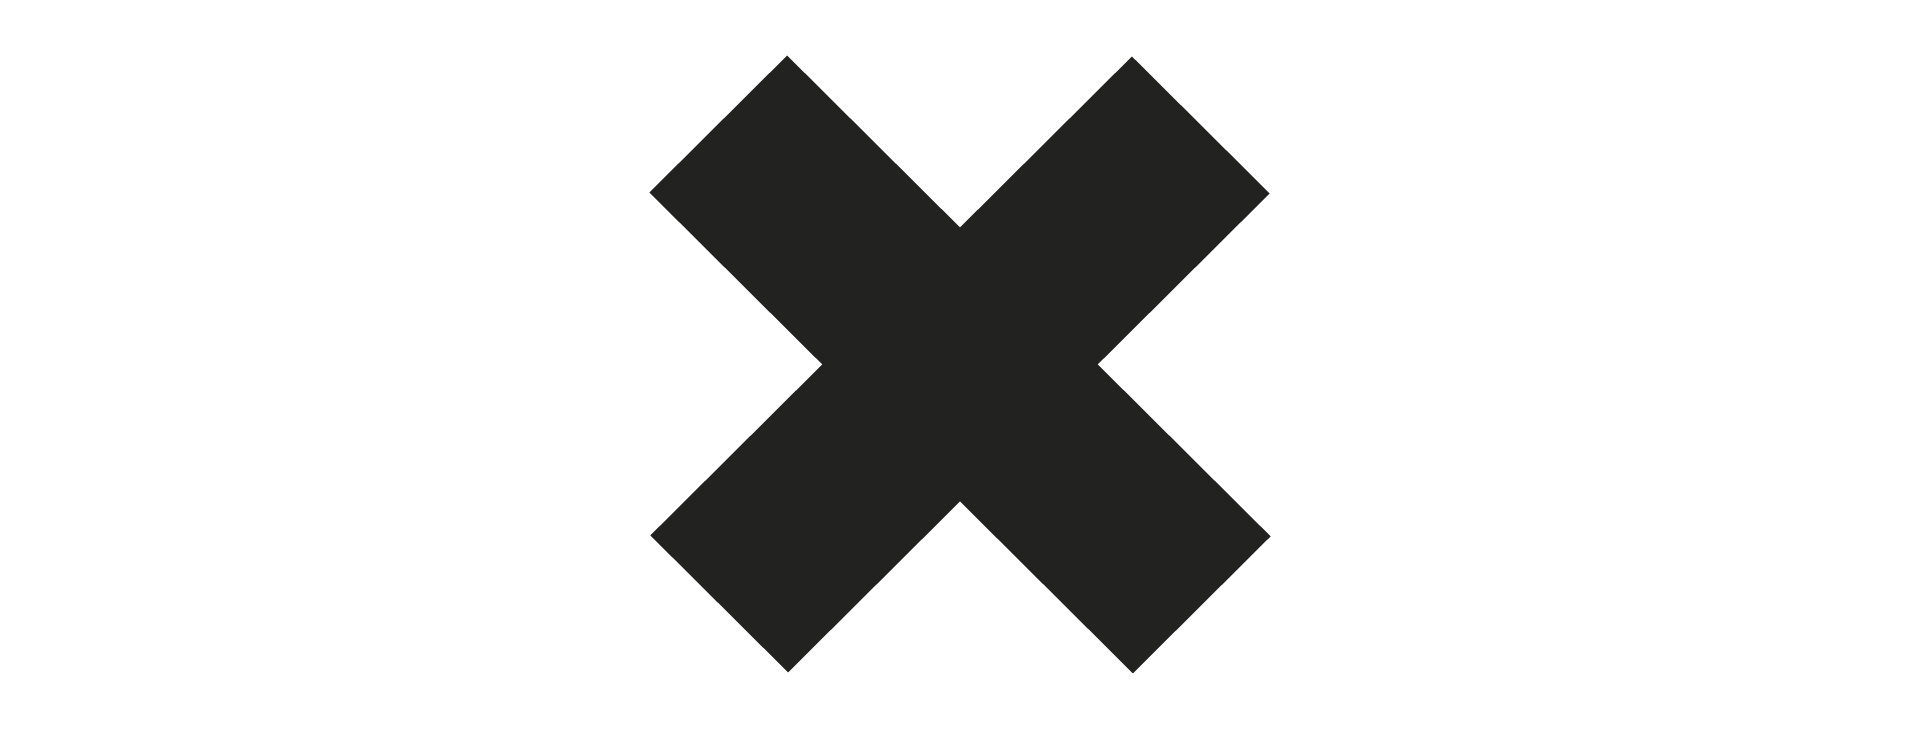 Image shows the x-sign